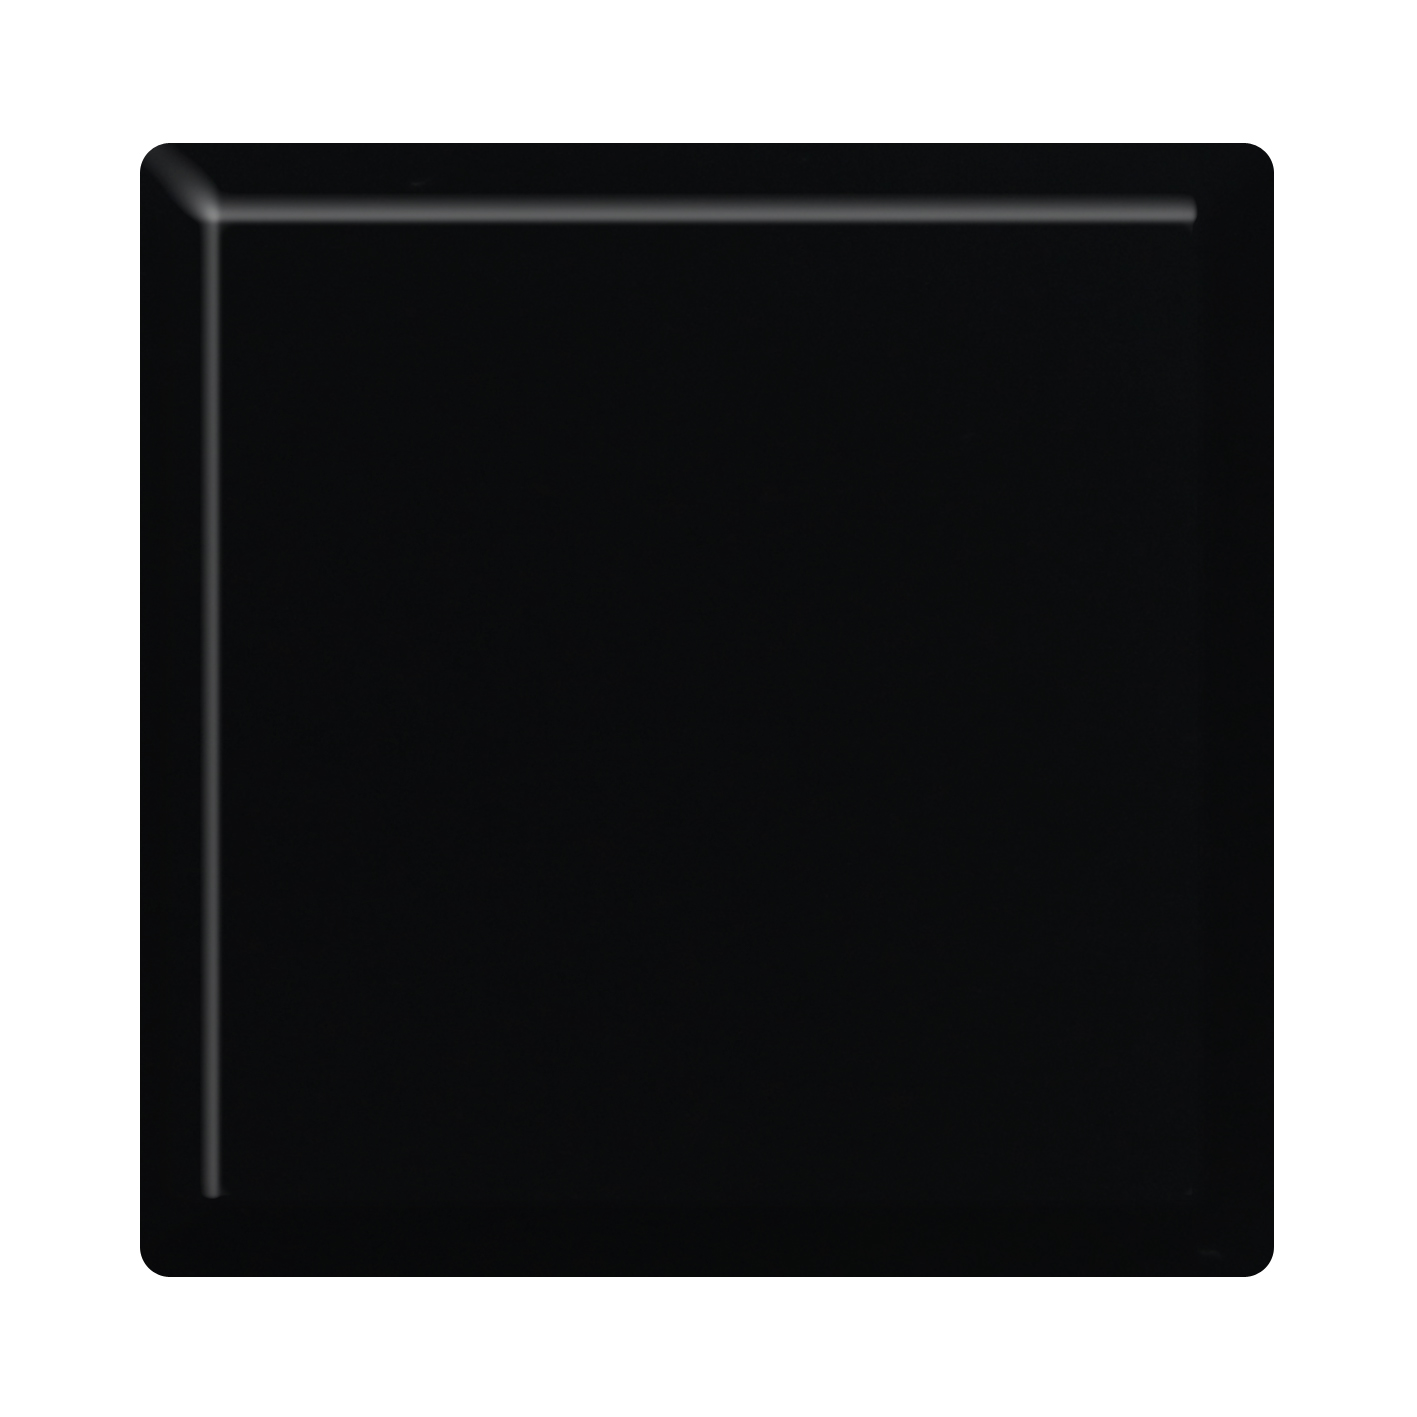 Black solid surface material sheet